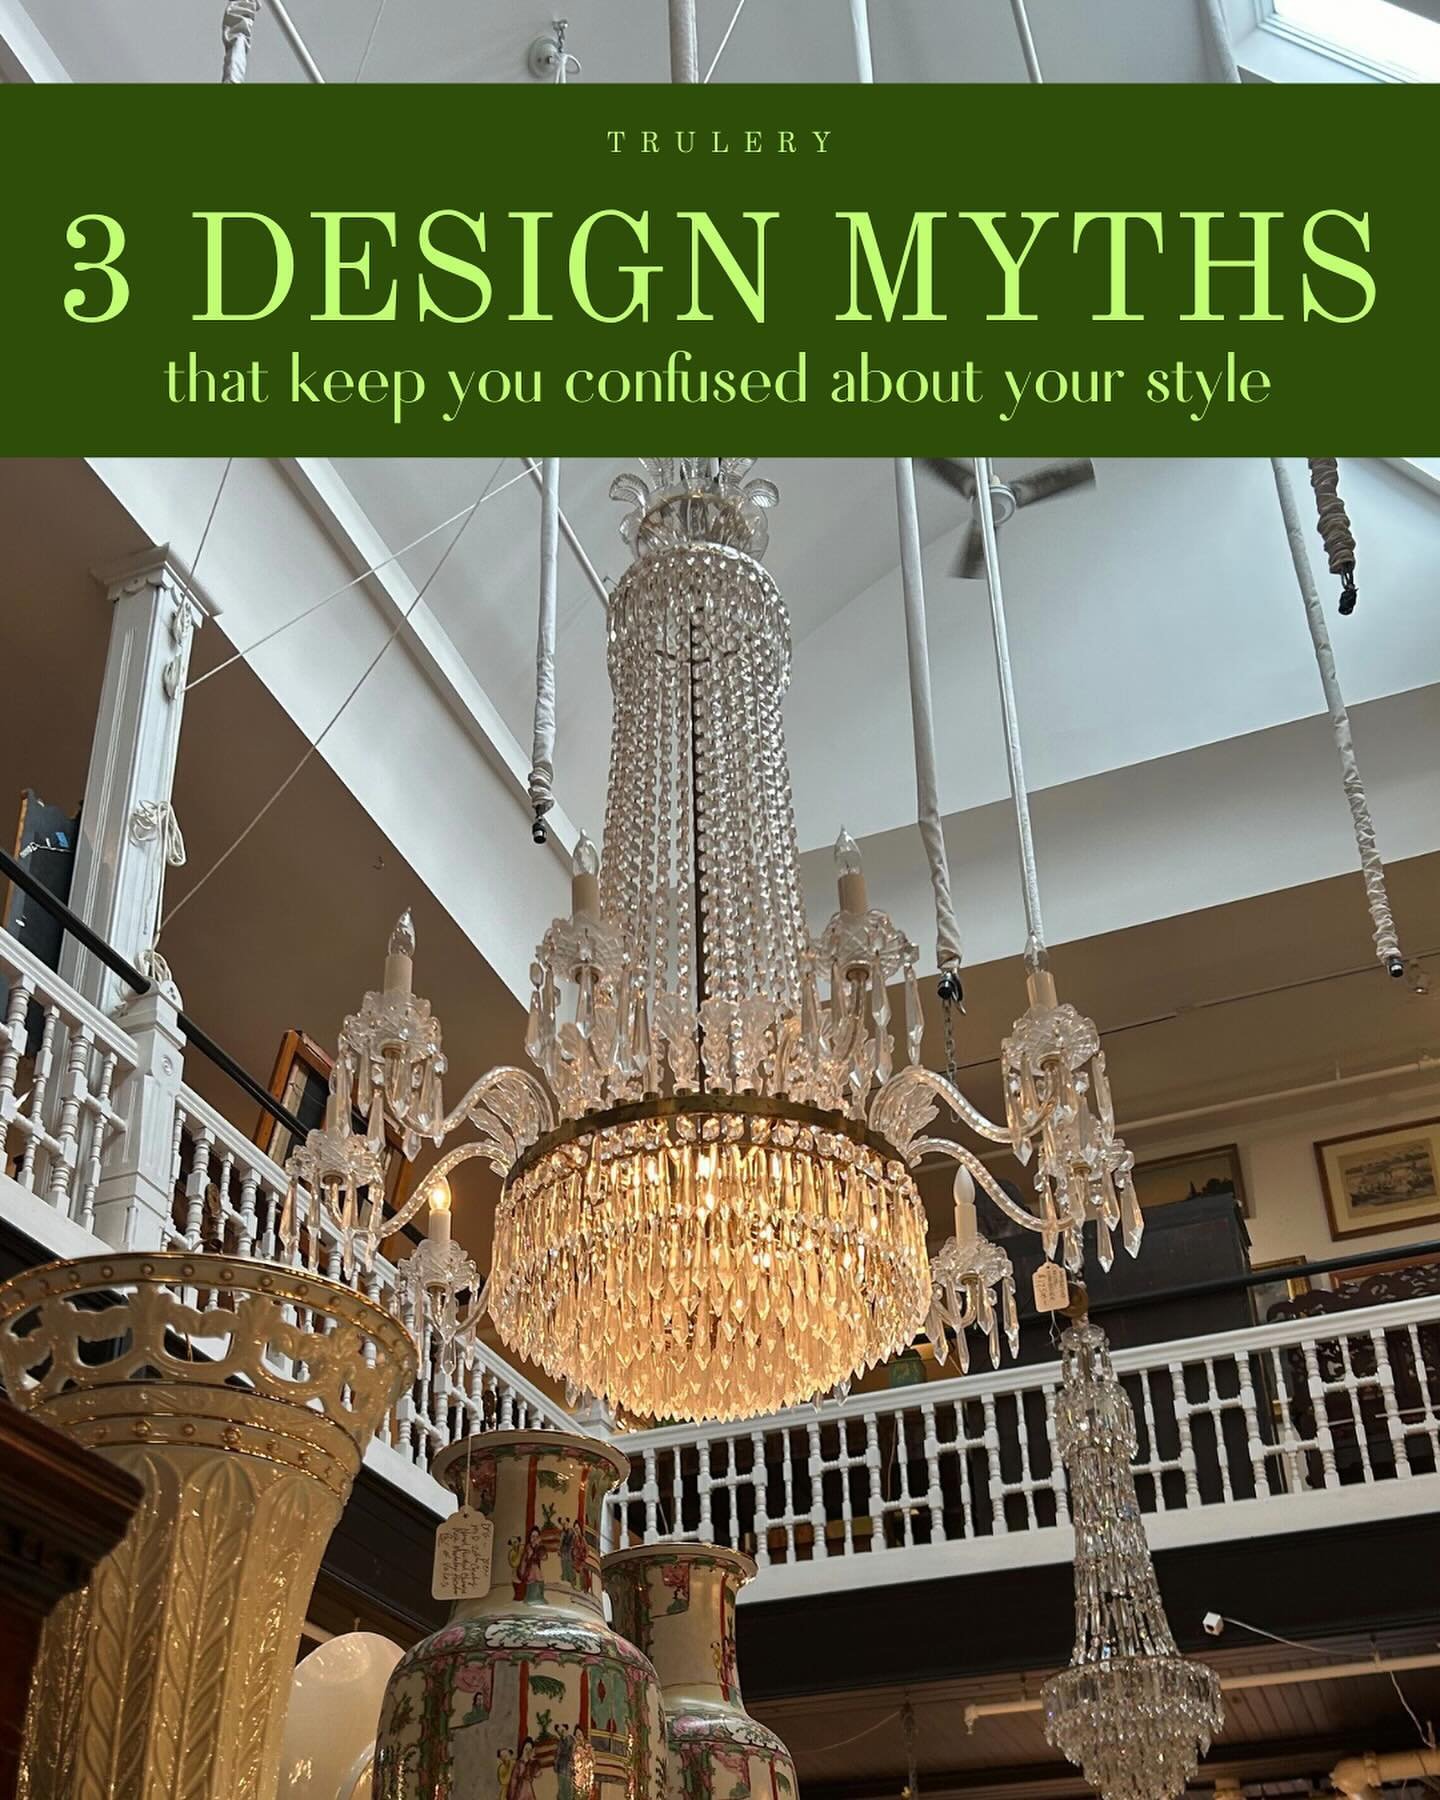 Sometimes we hold on to design myths that keep us from developing our design sensibilities&hellip; Talking about it on the blog now&hellip; click link for post.

#designpsychology
#trulery
#designstyle 
#interiordesign